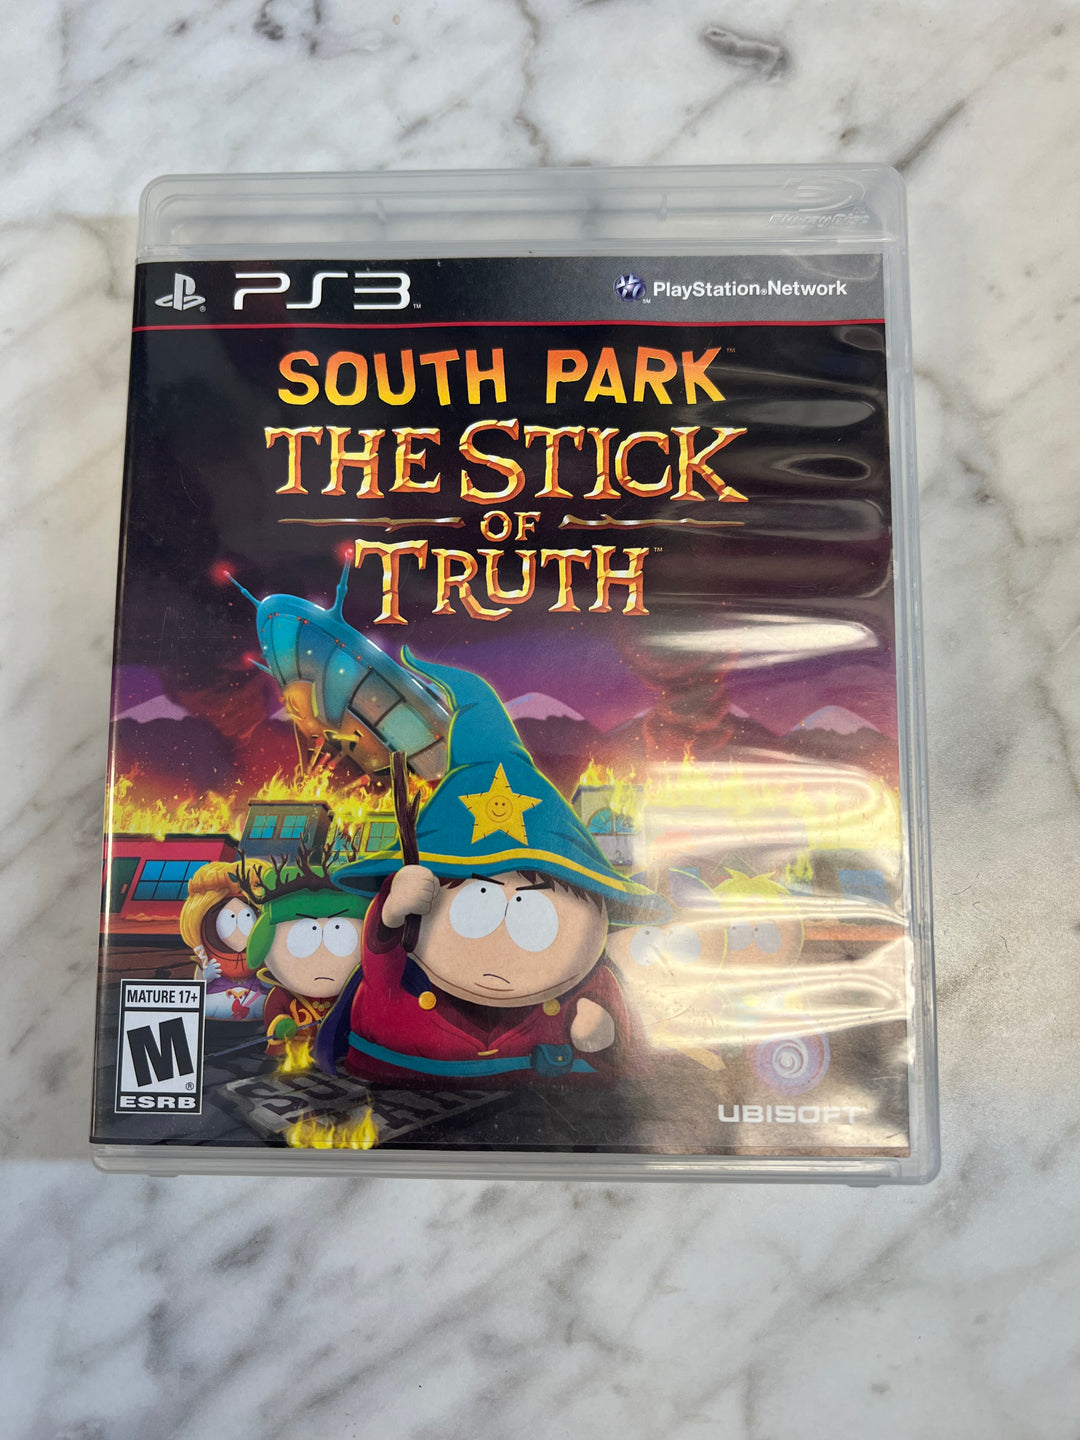 South Park the Stick of Truth for PS3 Playstation 3 Tested and working DU72124